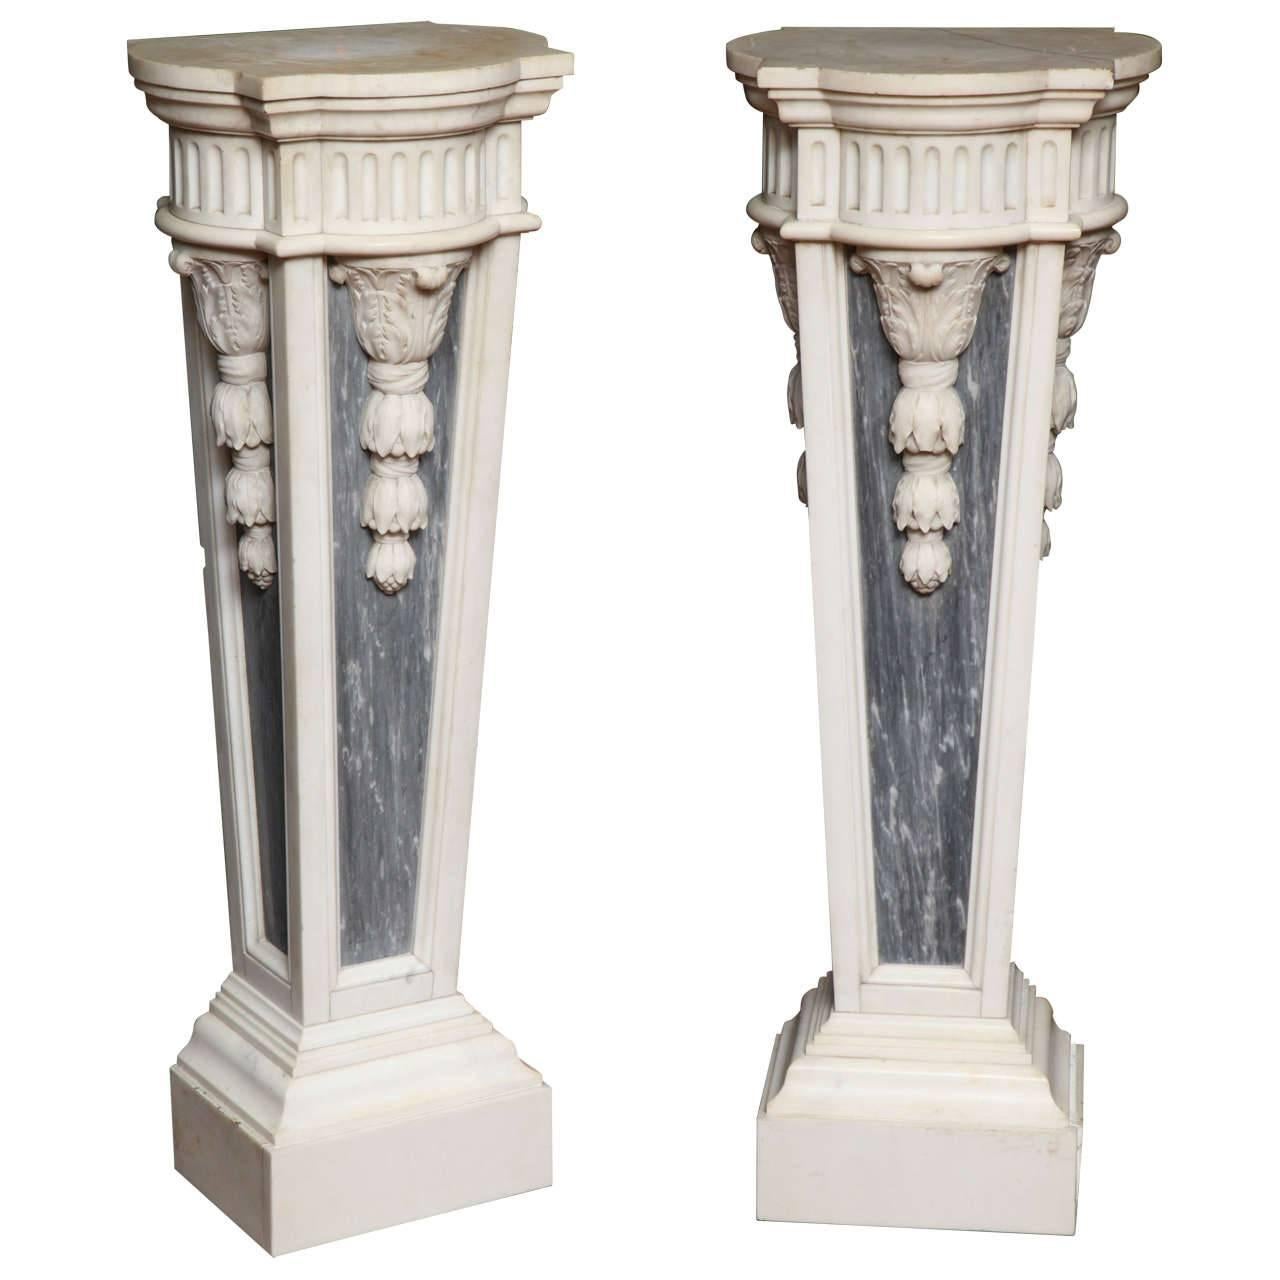 Pair of French Louis XVI Style, Two-Toned Carrera and Grey Marble Pedestals